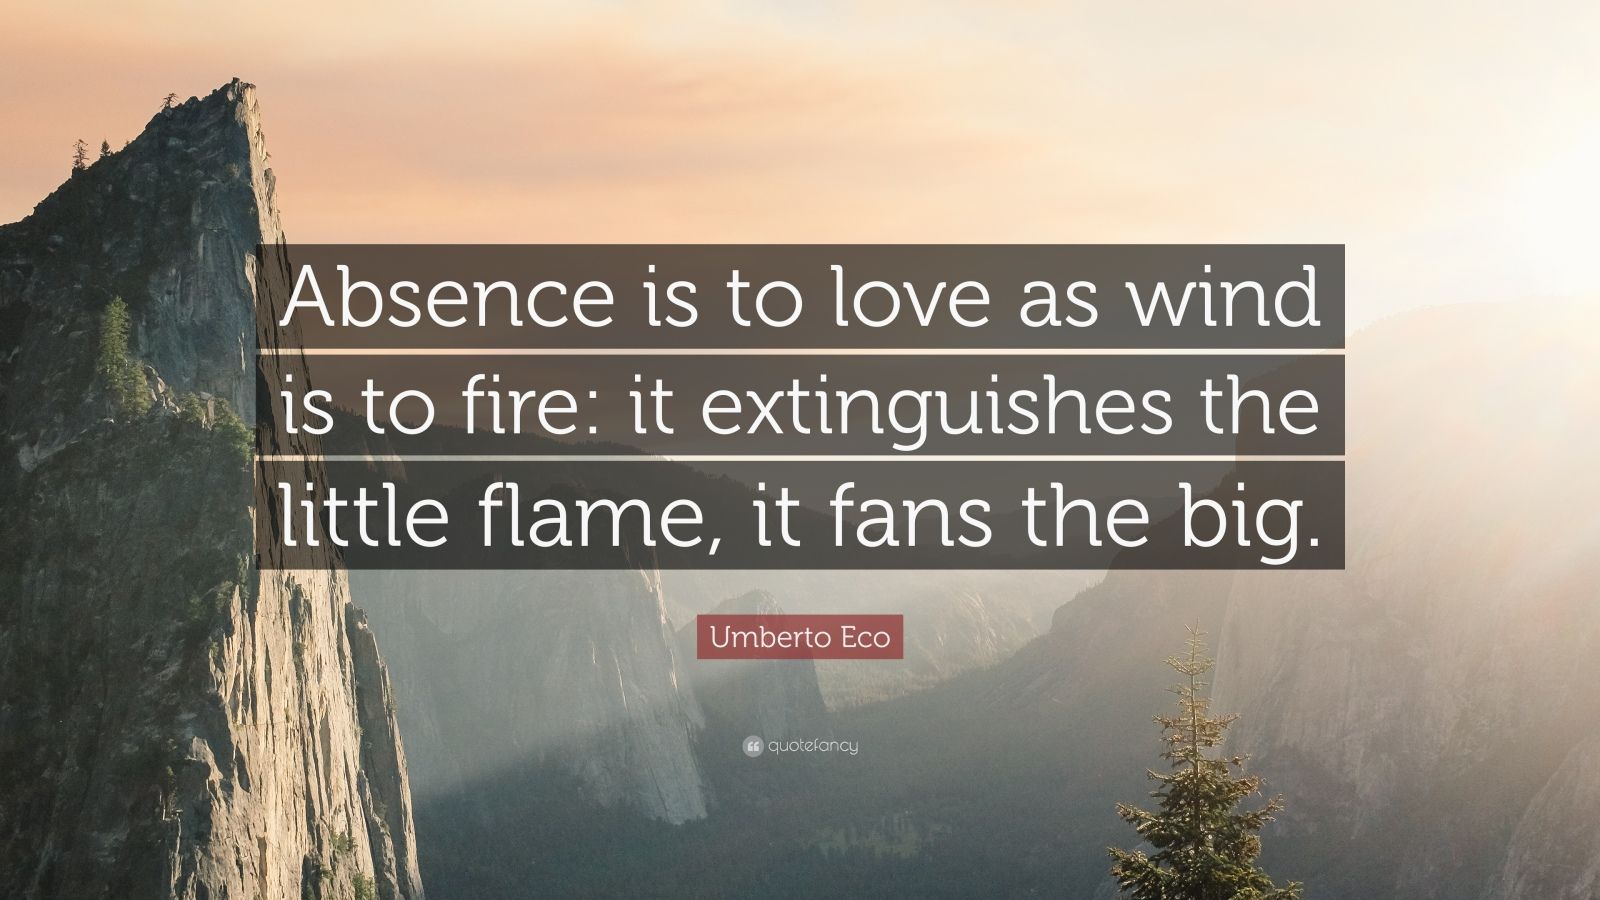 Umberto Eco Quote: "Absence is to love as wind is to fire: it extinguishes the little flame, it ...